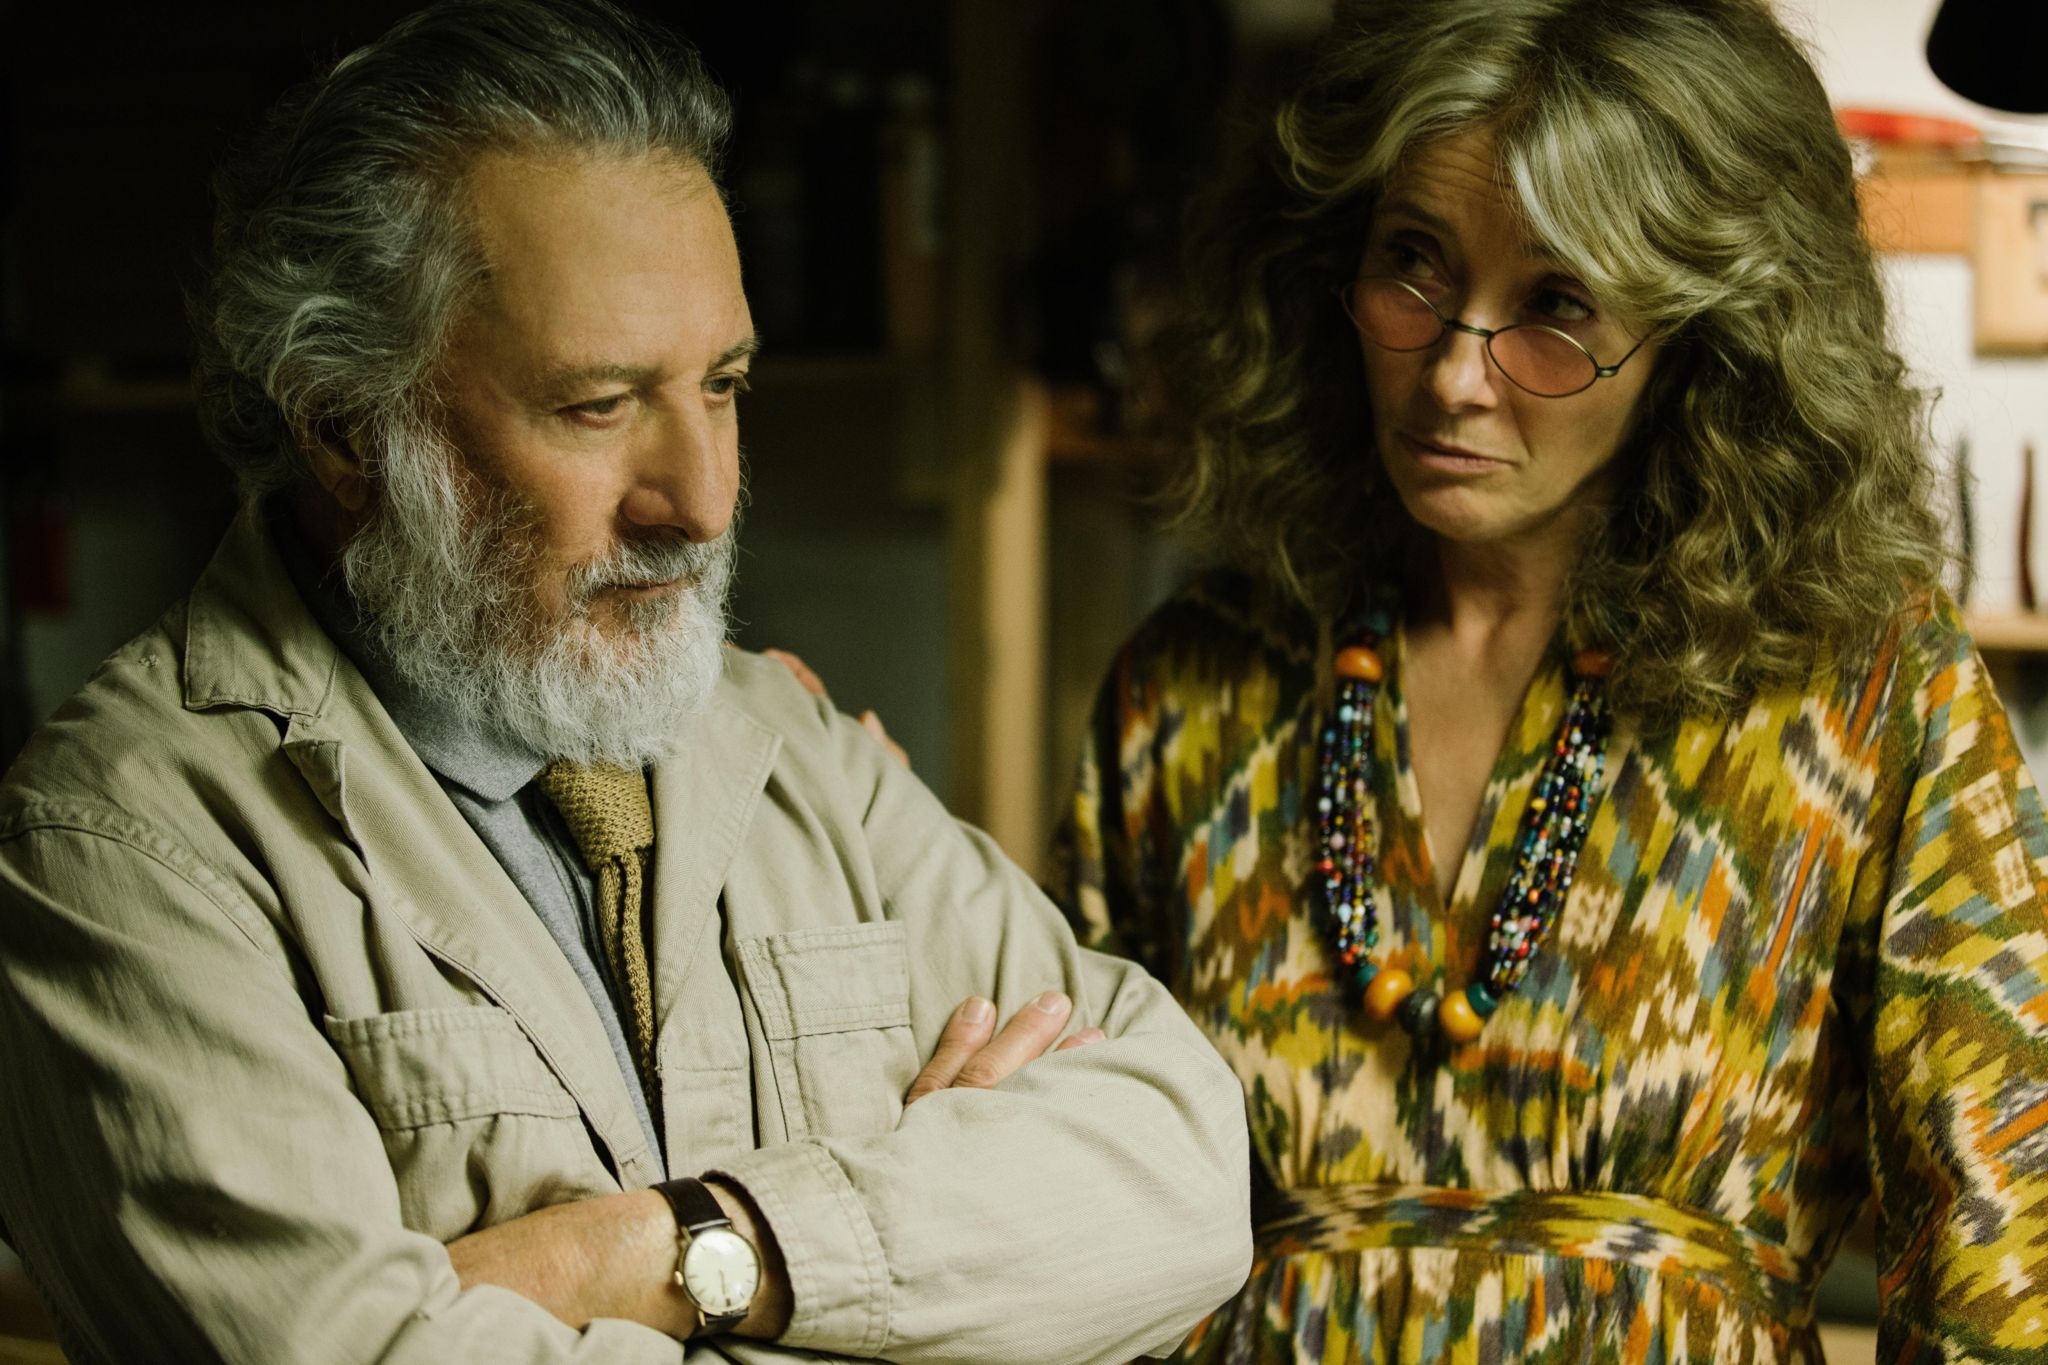 A still from The Meyerowitz Stories featuring Justin Hoffman and Emma Thompson